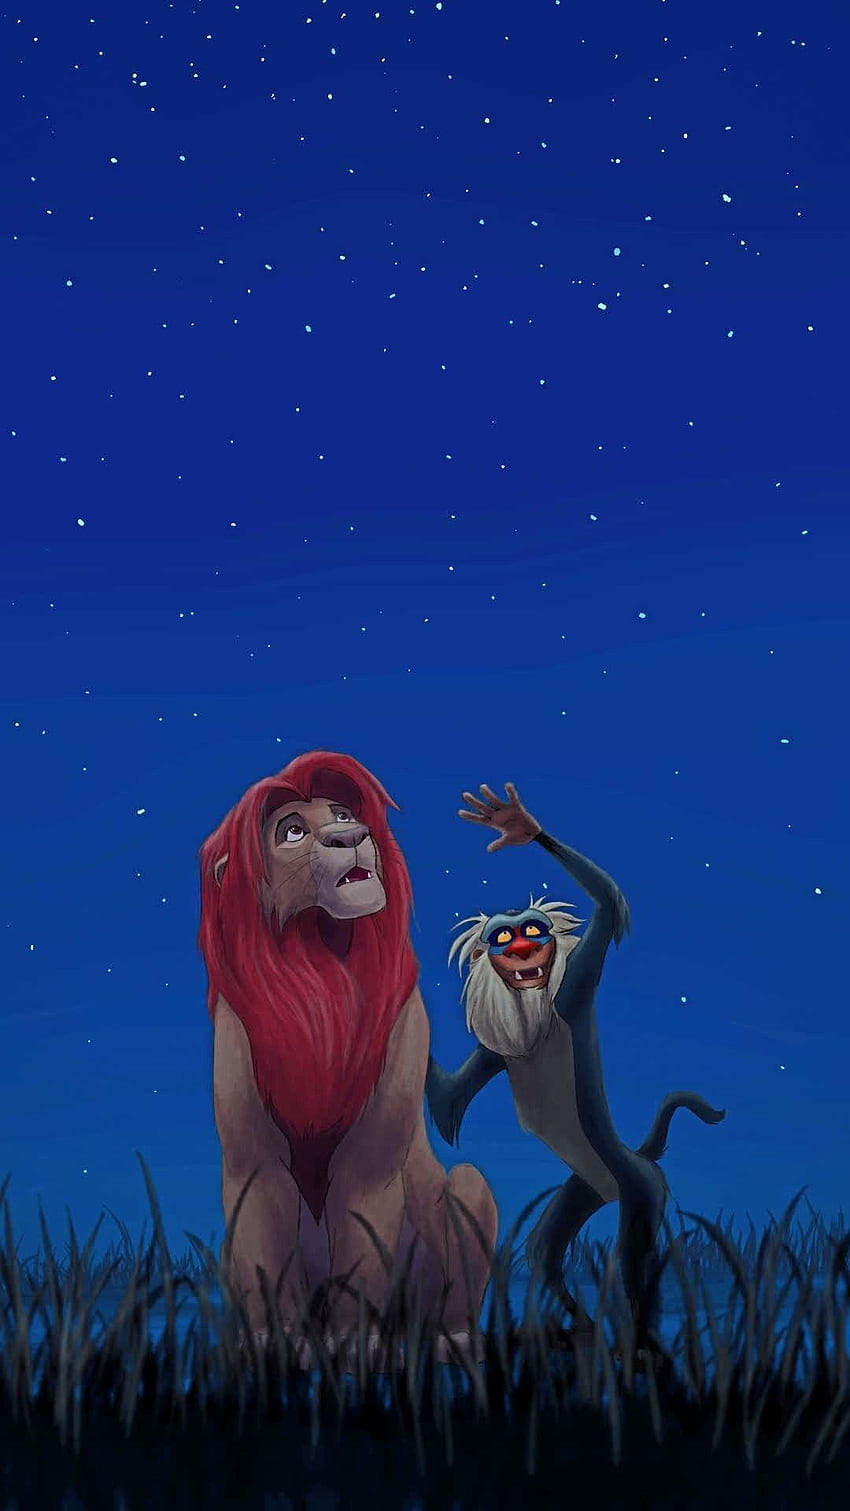 Lion King Face IPhone Wallpaper  IPhone Wallpapers  iPhone Wallpapers